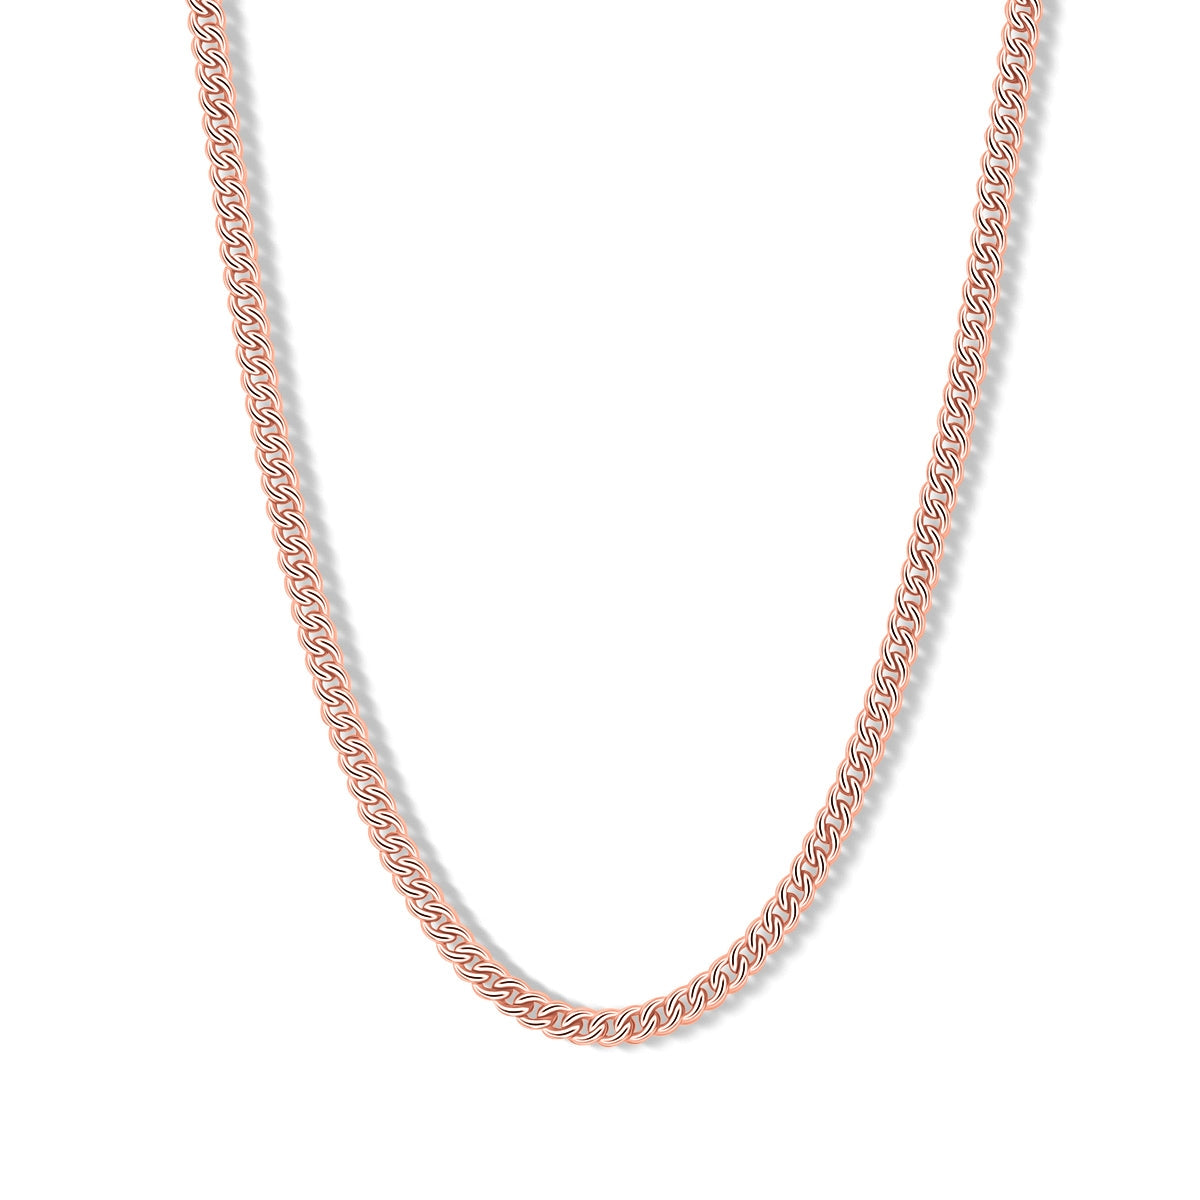 Simple rose gold chain link necklace